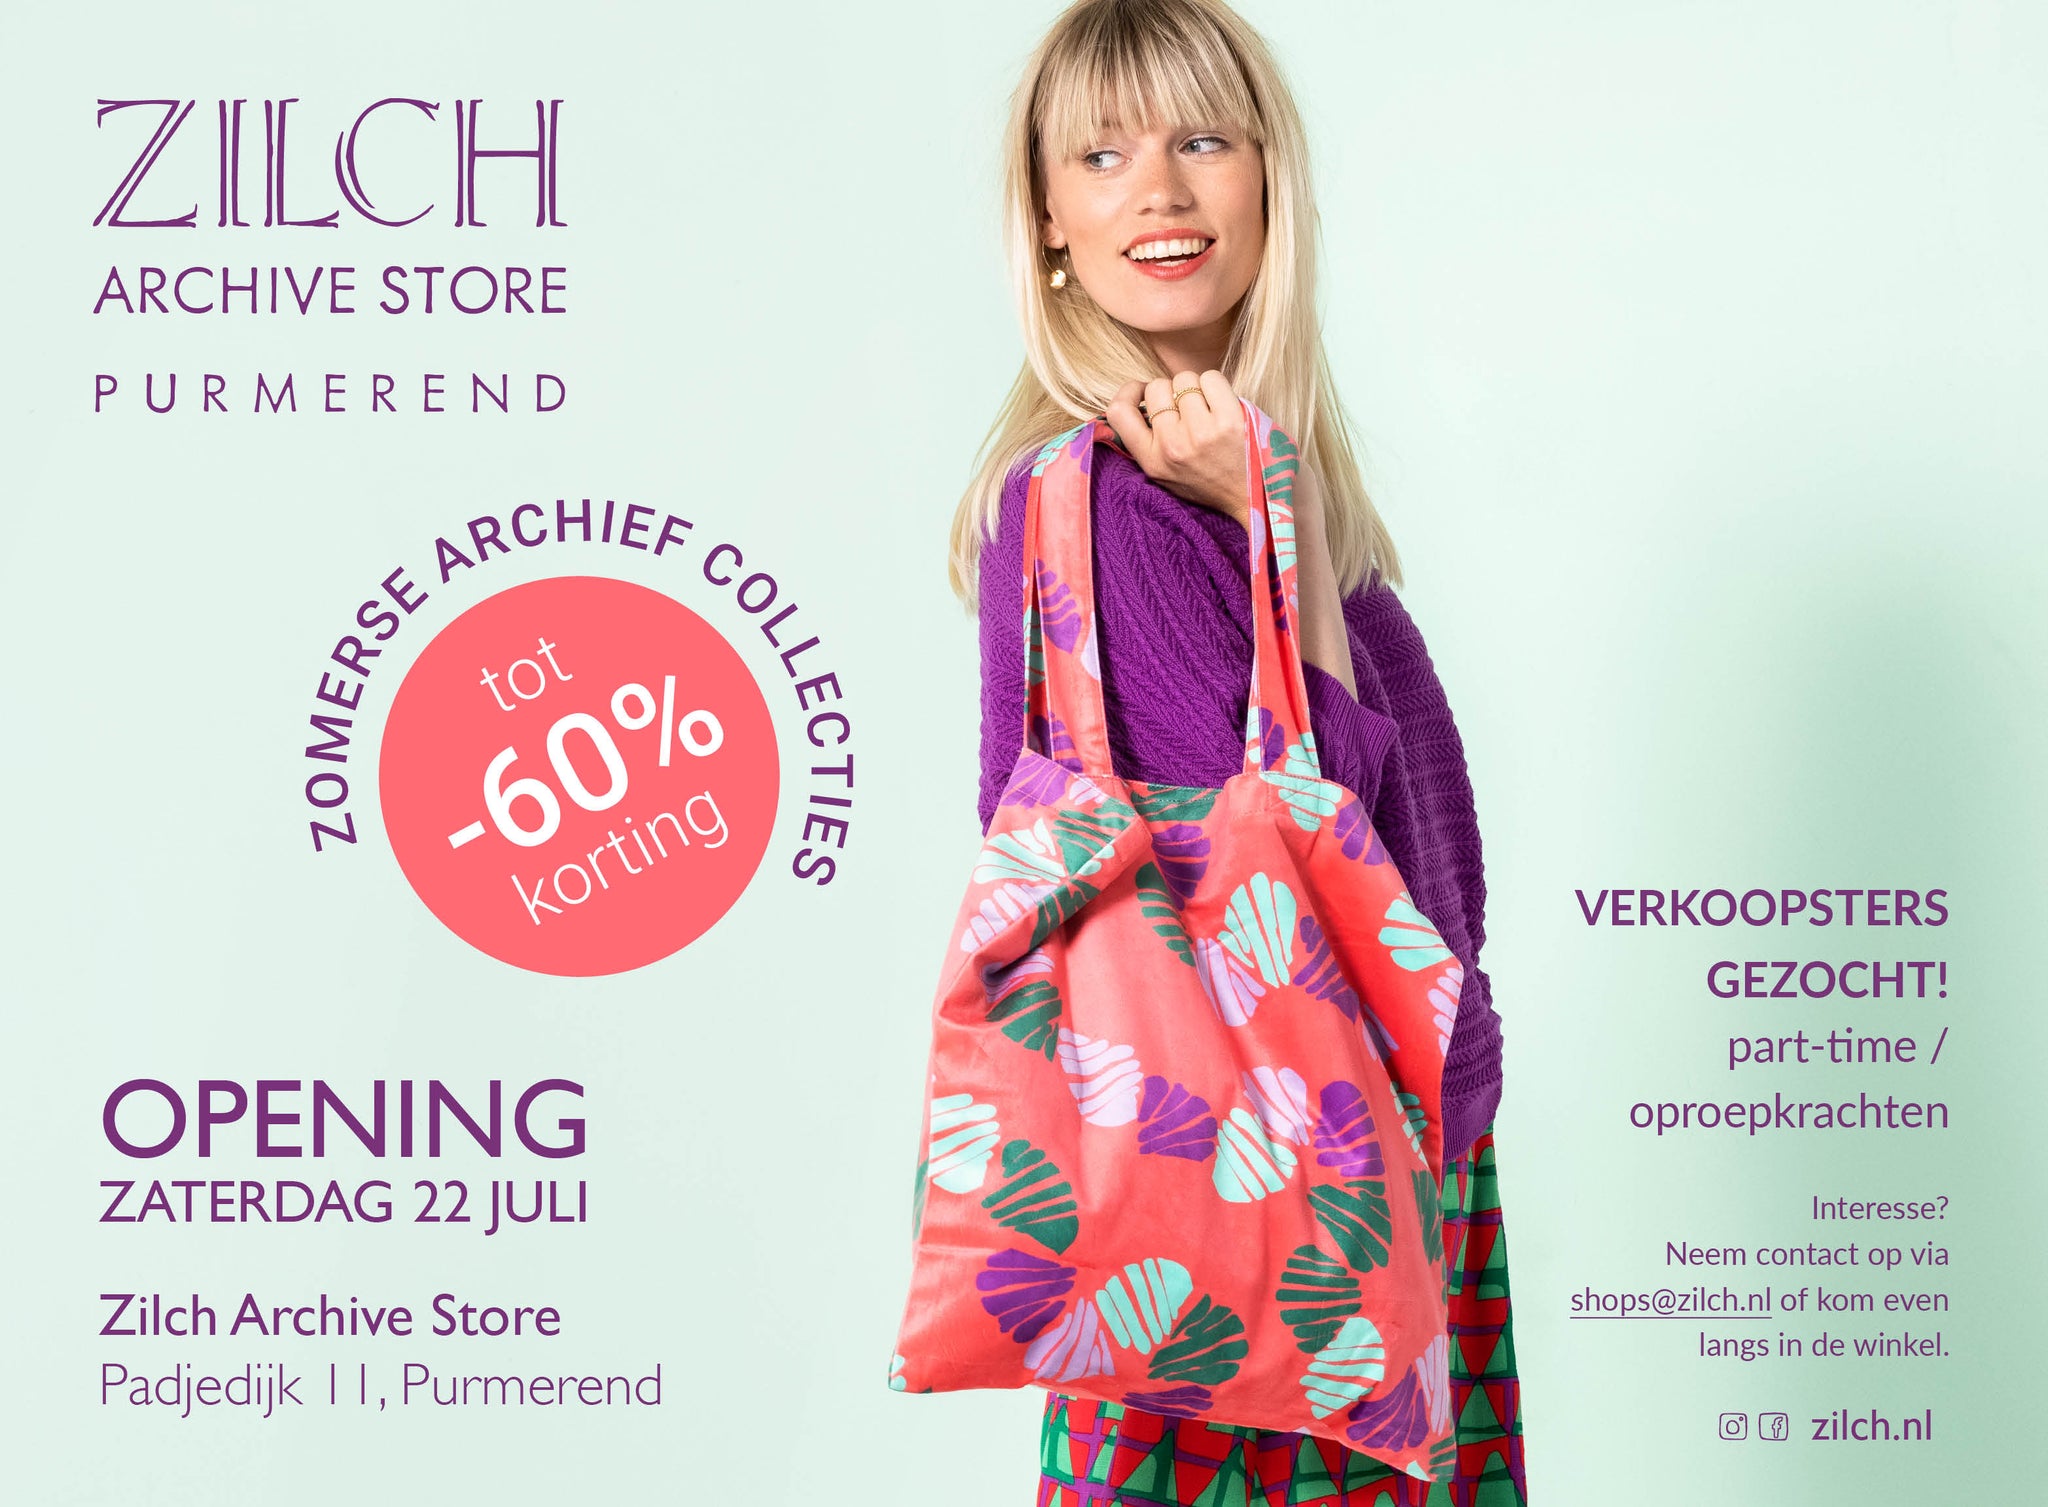 Zilch ouvre Archive Store dans Purmerend!